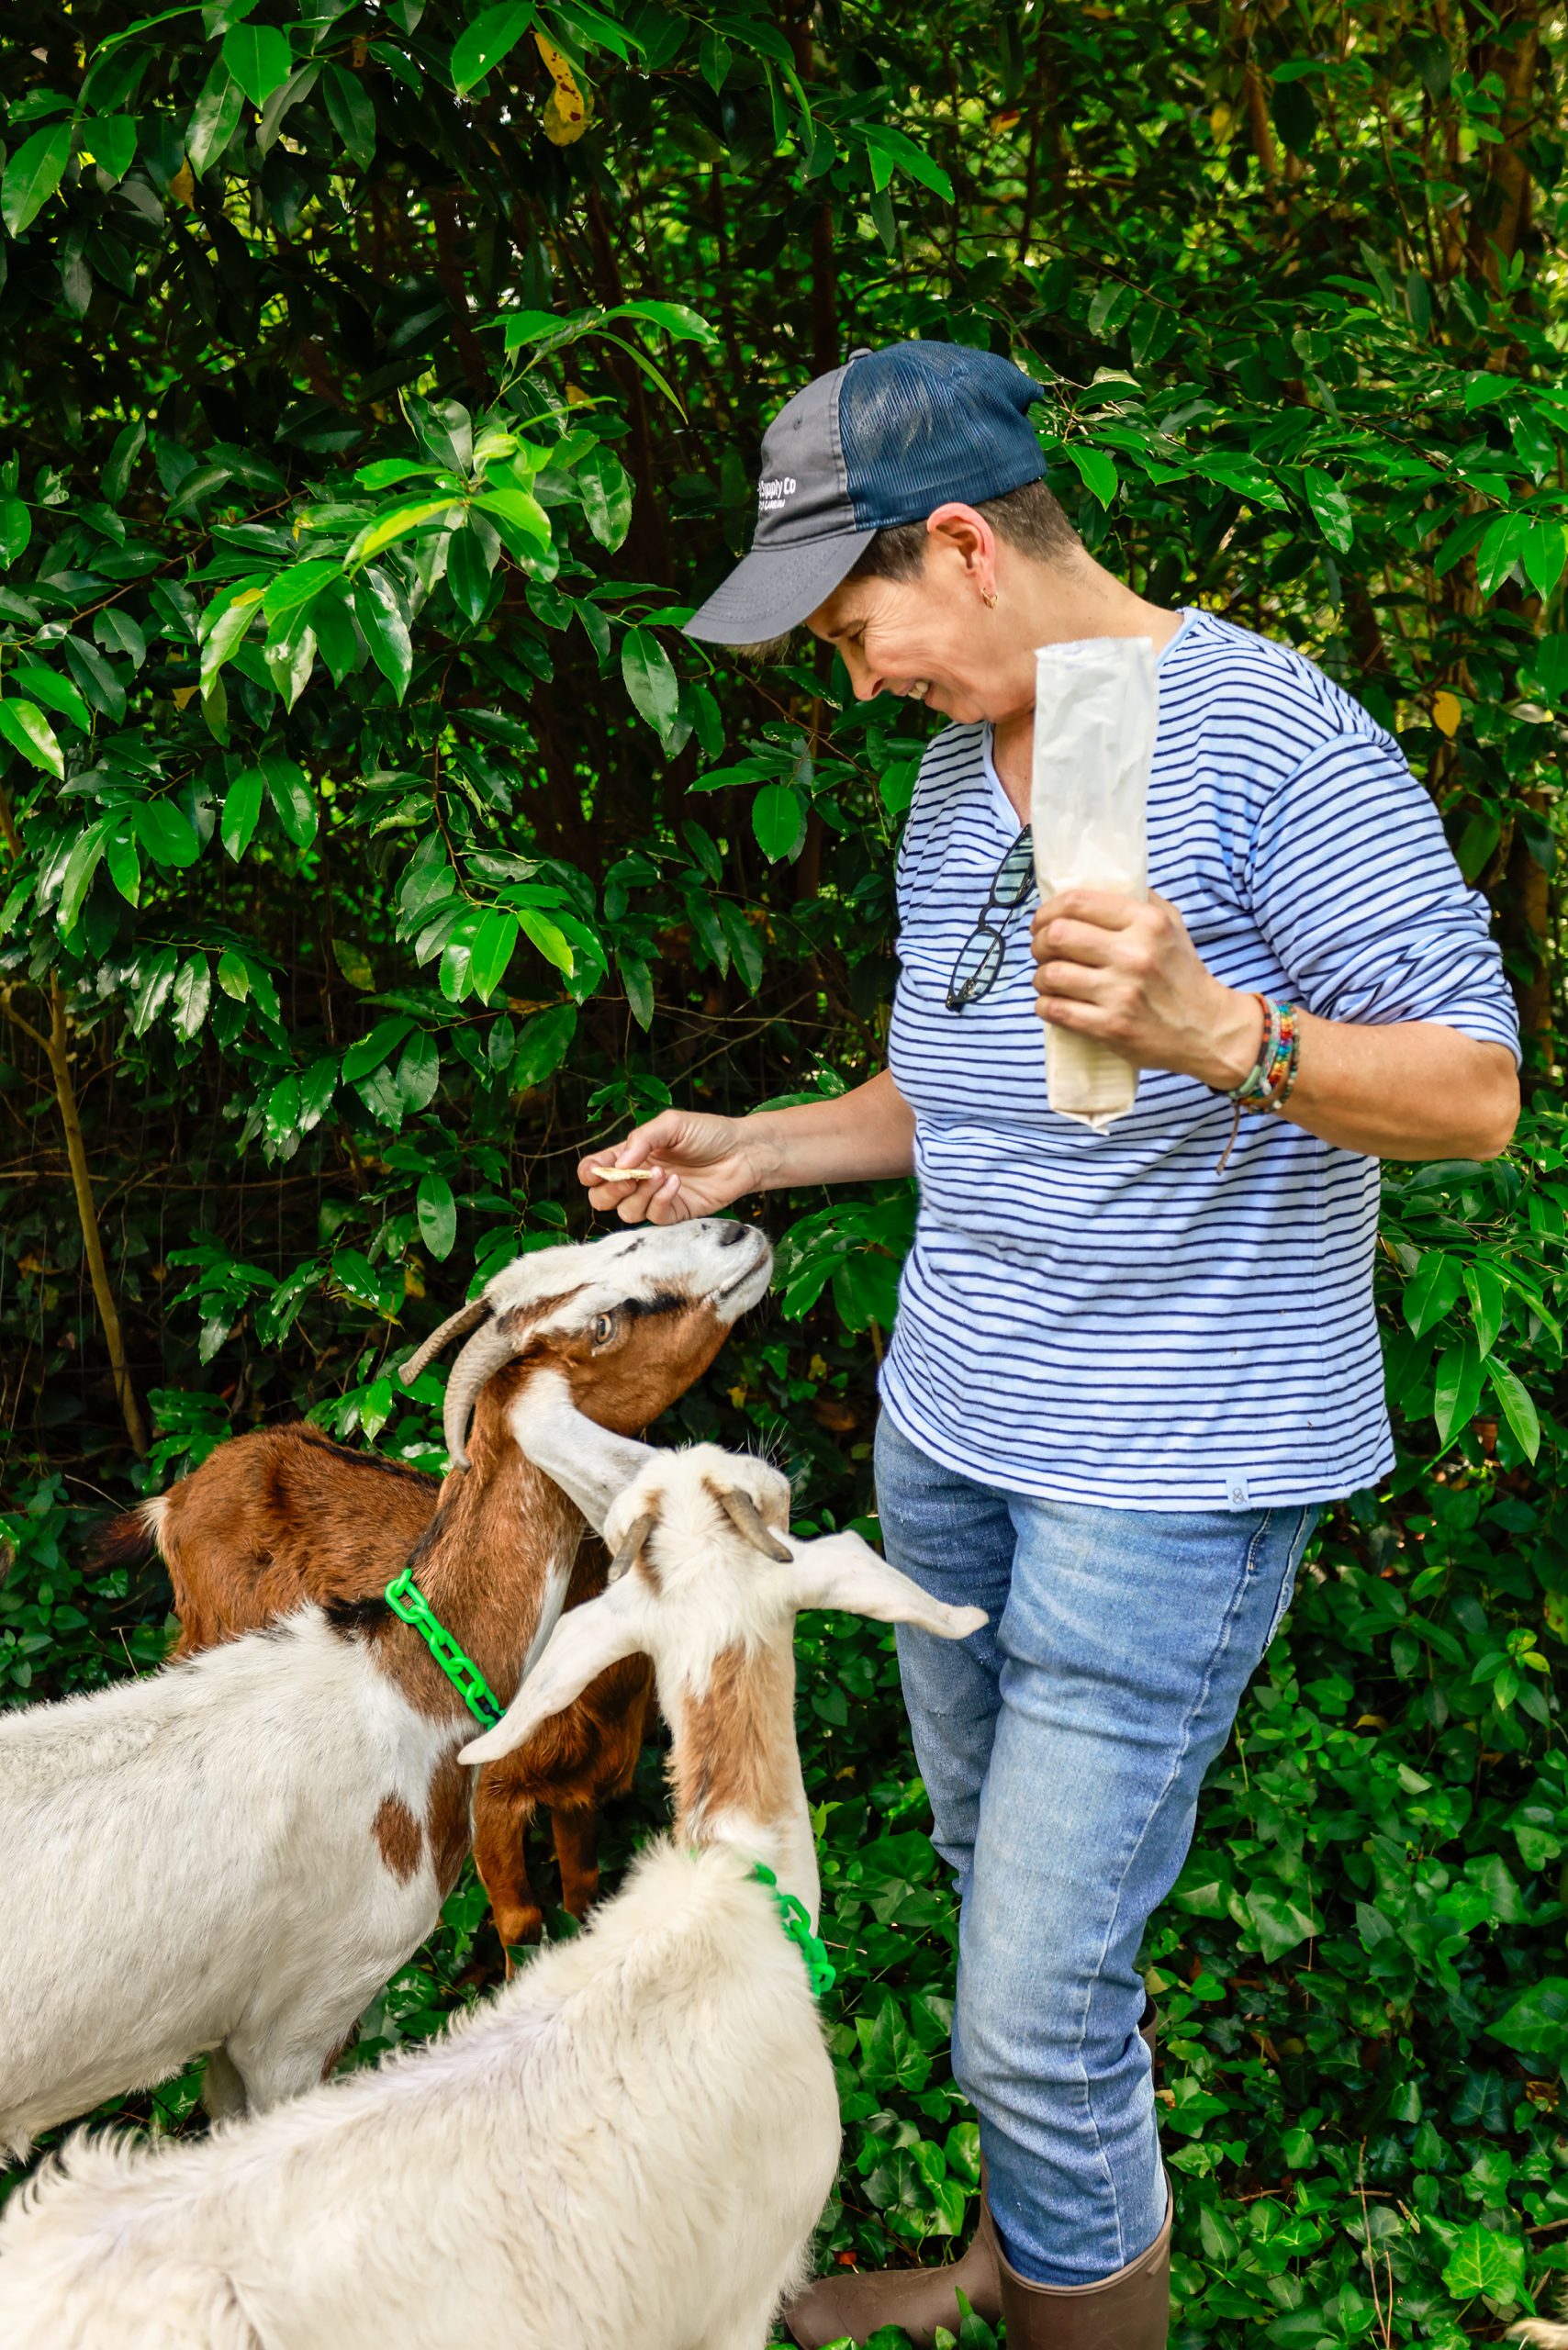 Silk and her sister, Lace, are rewarded with saltine crackers from Mona. The goat crew spent a week clearing vines and underbrush from her backyard. Mona was attracted to the environmentally friendly aspects of using goats rather than gasoline, or electric-powered tools, to clear her yard.
